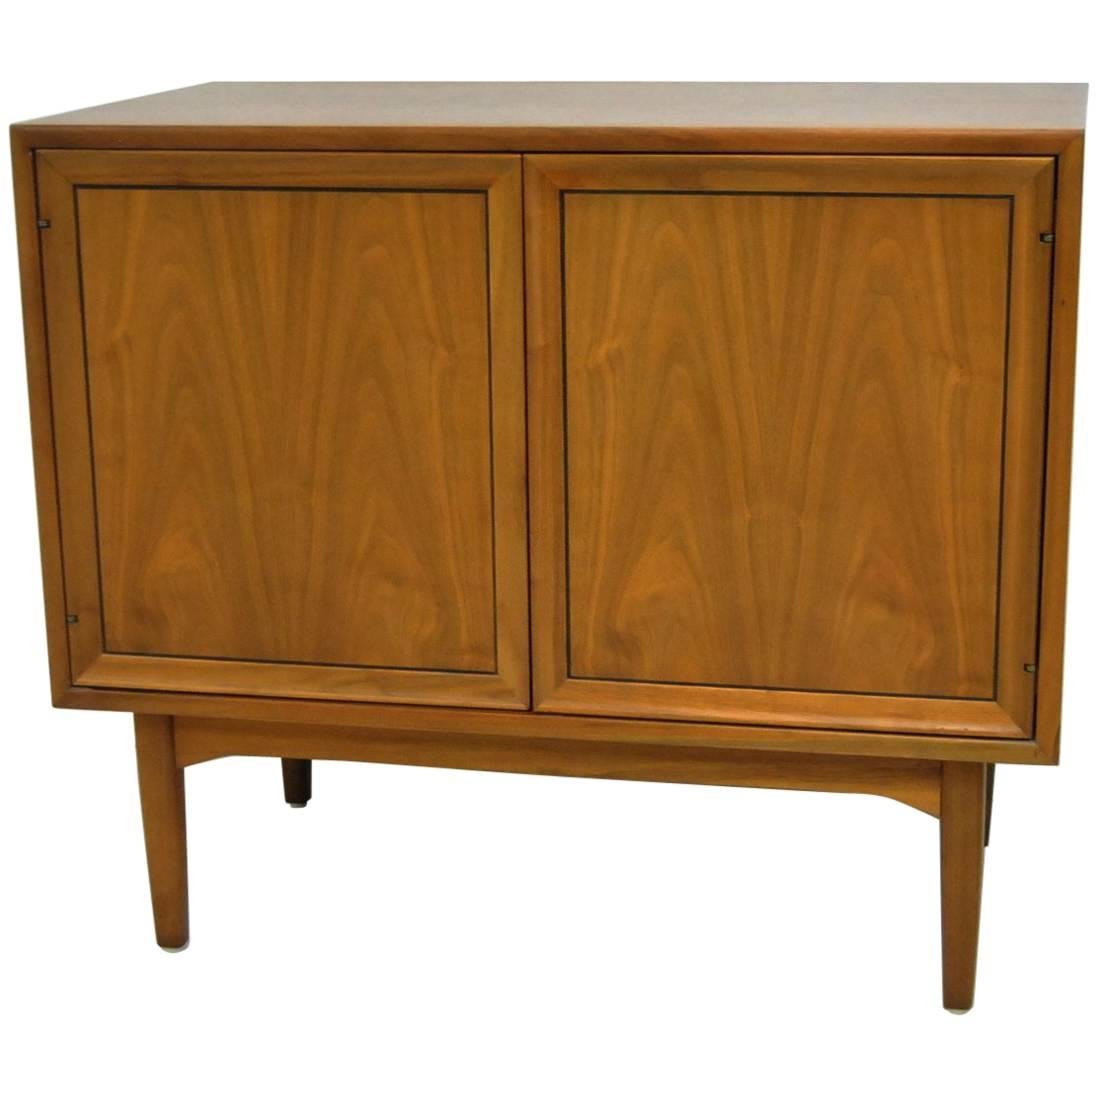 Midcentury Walnut Record Cabinet by Drexel